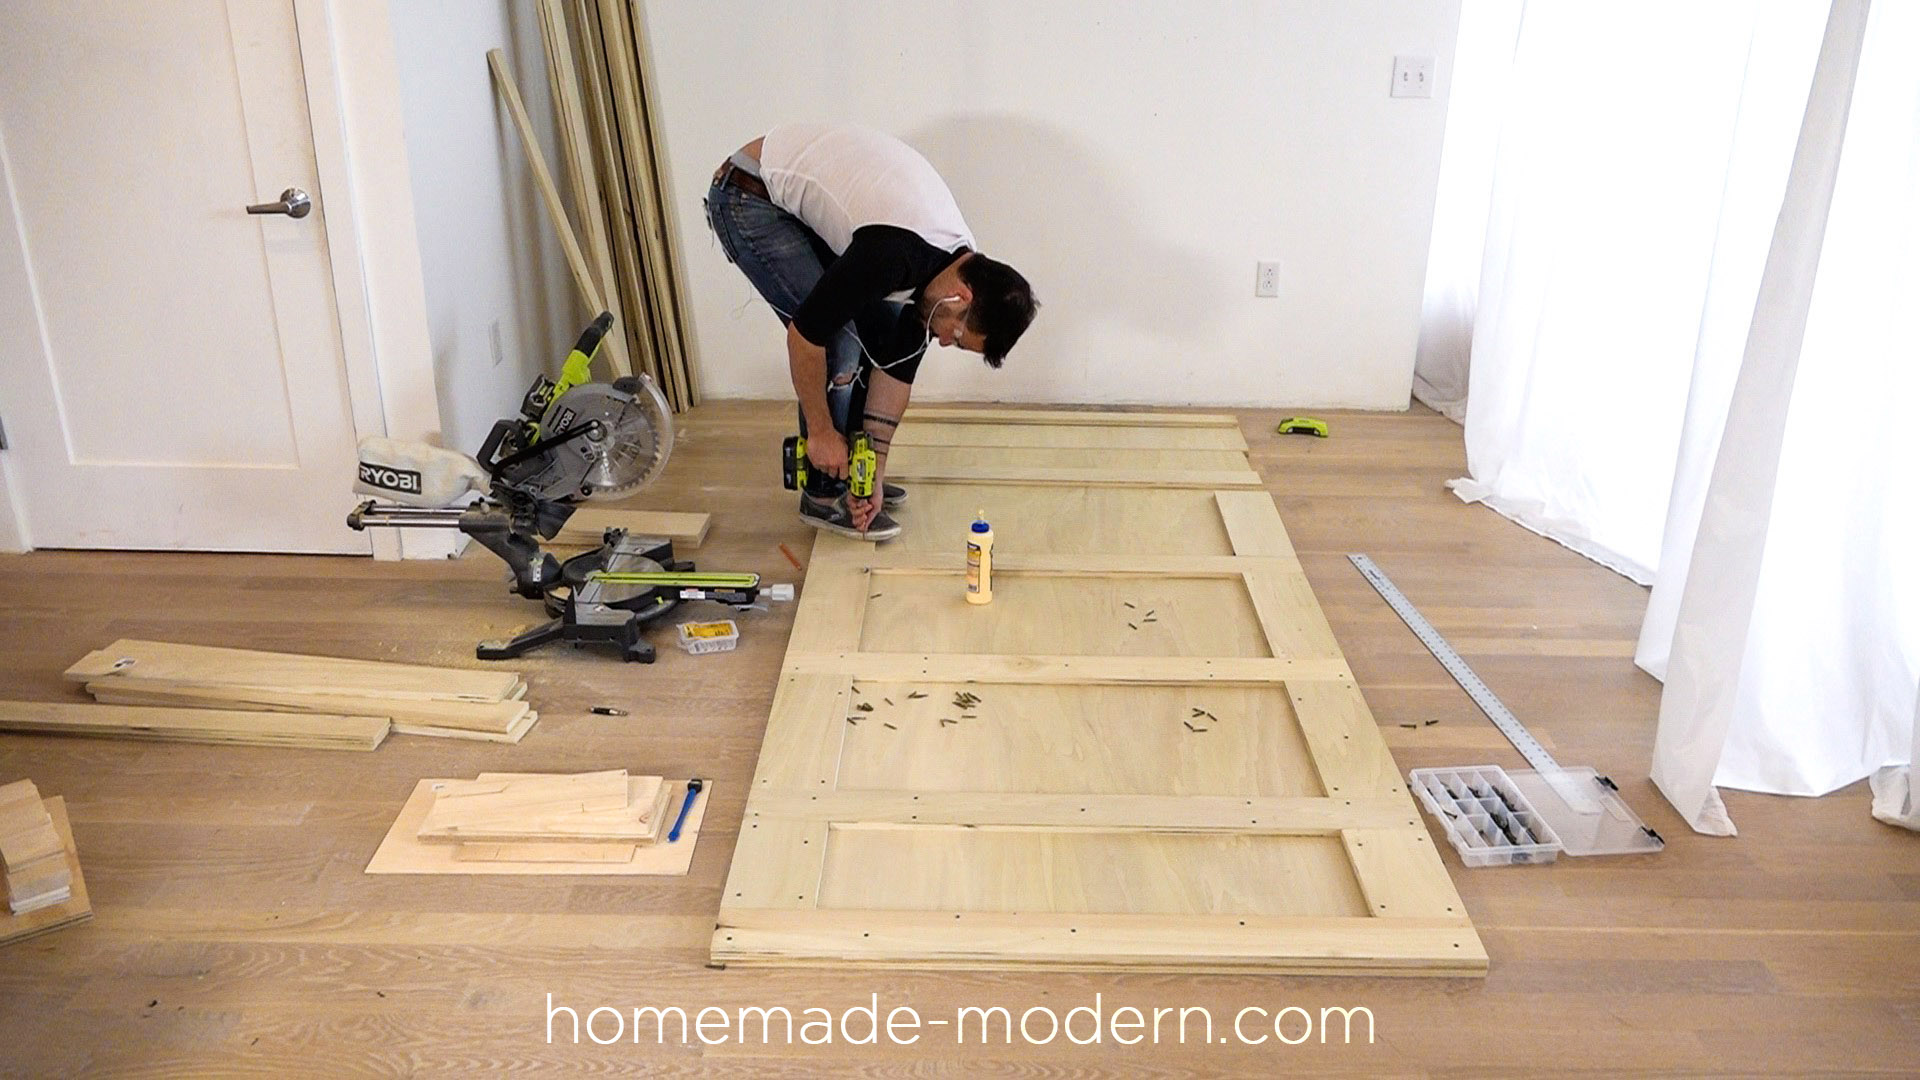 This fold-out gym is perfect for crossfit style exercise routines at home and is made from plywood. Full instructions can be found at HomeMade-Modern.com